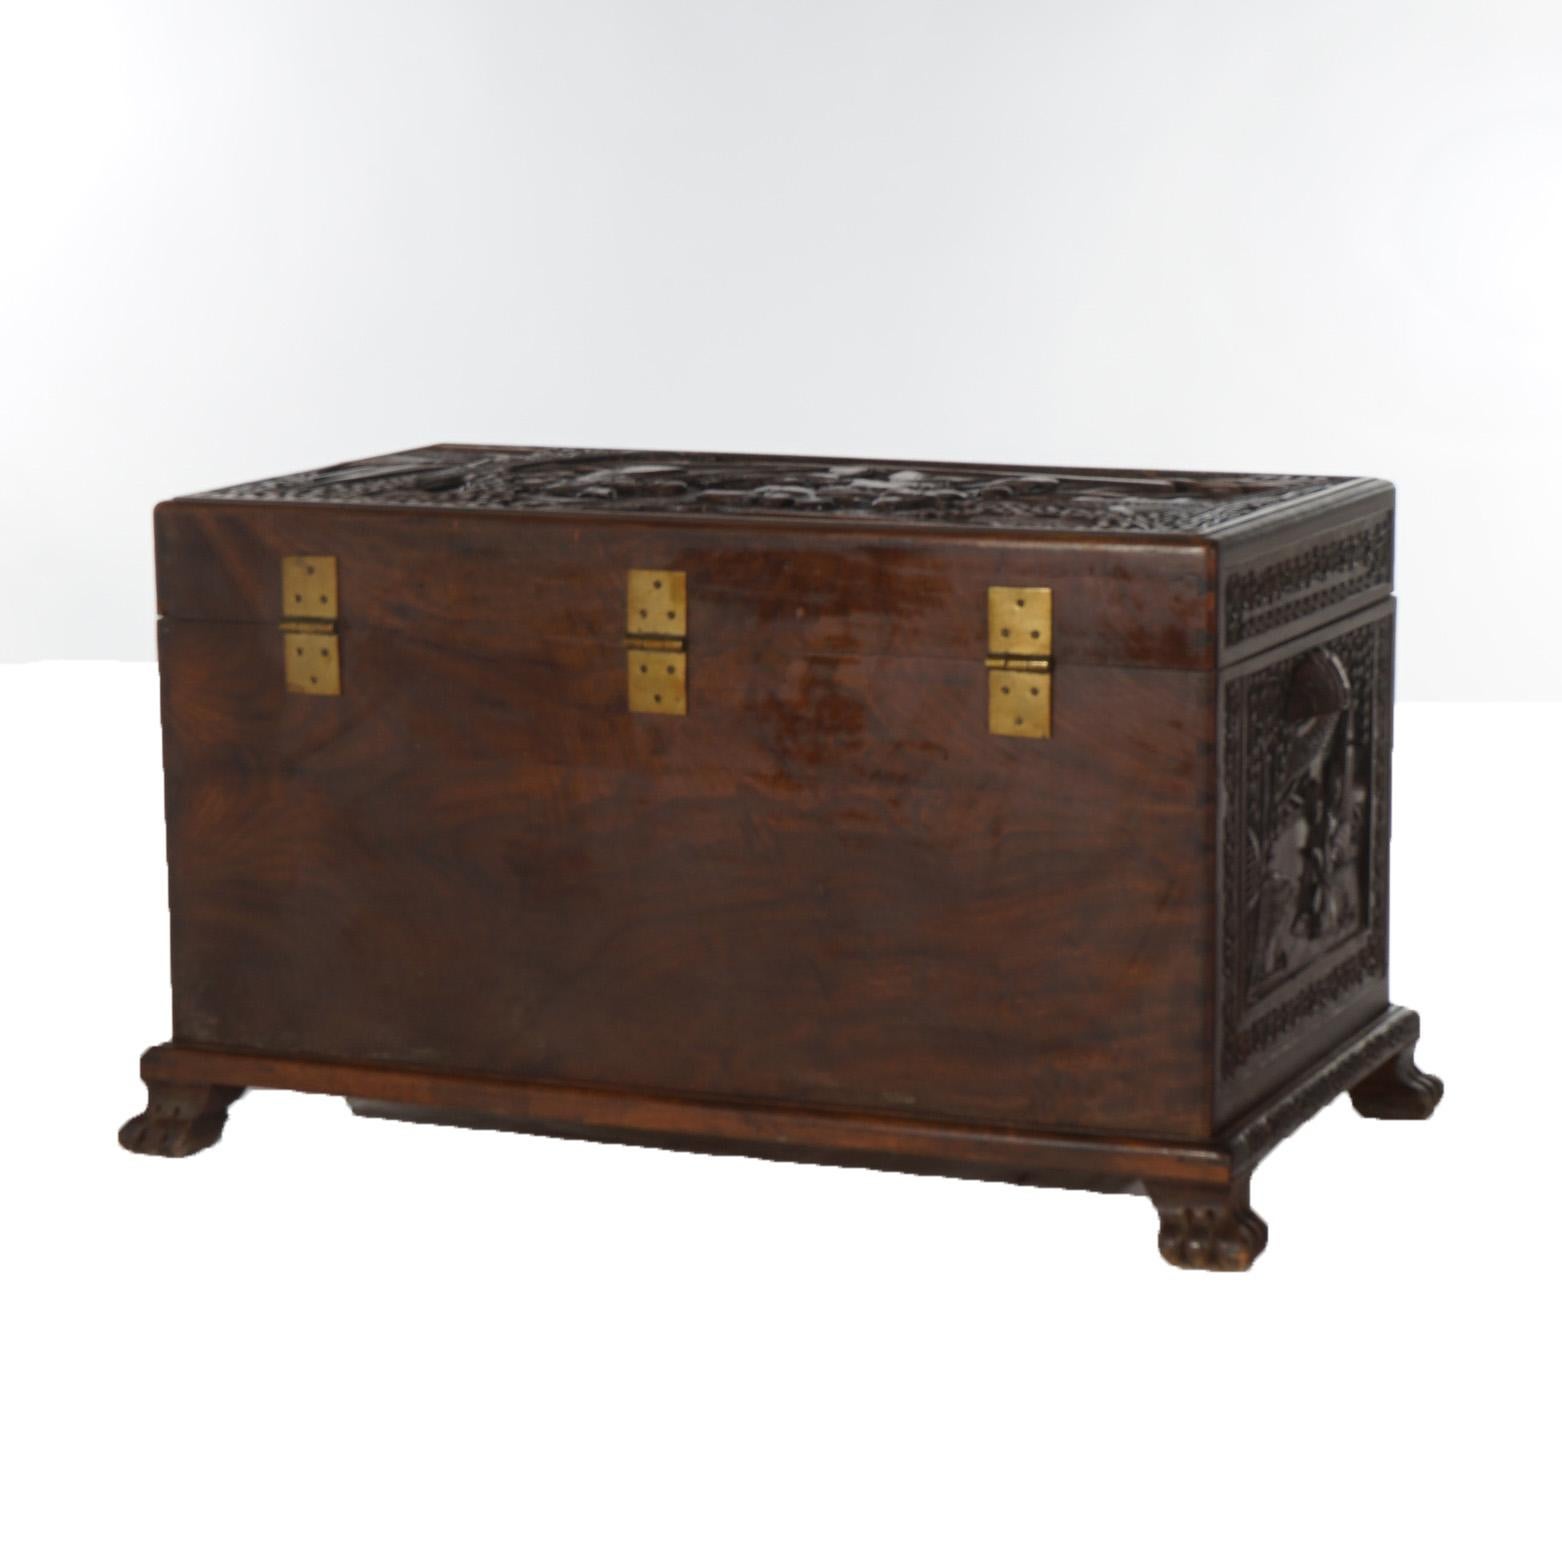 Antique Chinese Hardwood Carved in Relief Chinoiserie Blanket Chest Chest C1920 For Sale 3